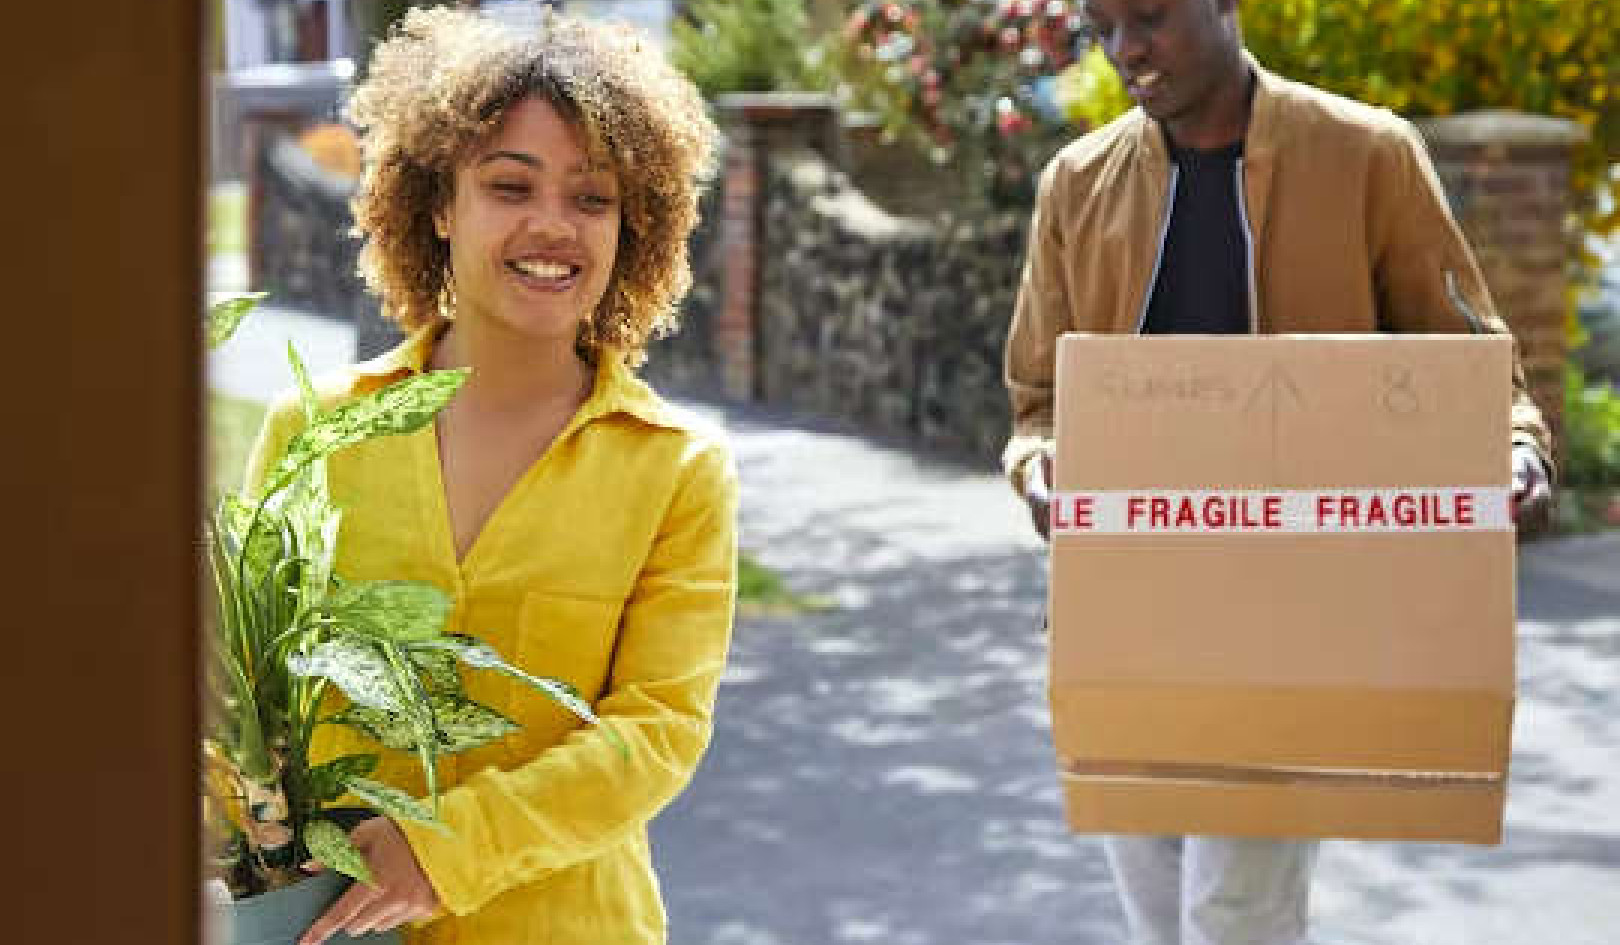 Moving in with Your Partner? Talk about These 3 Things First